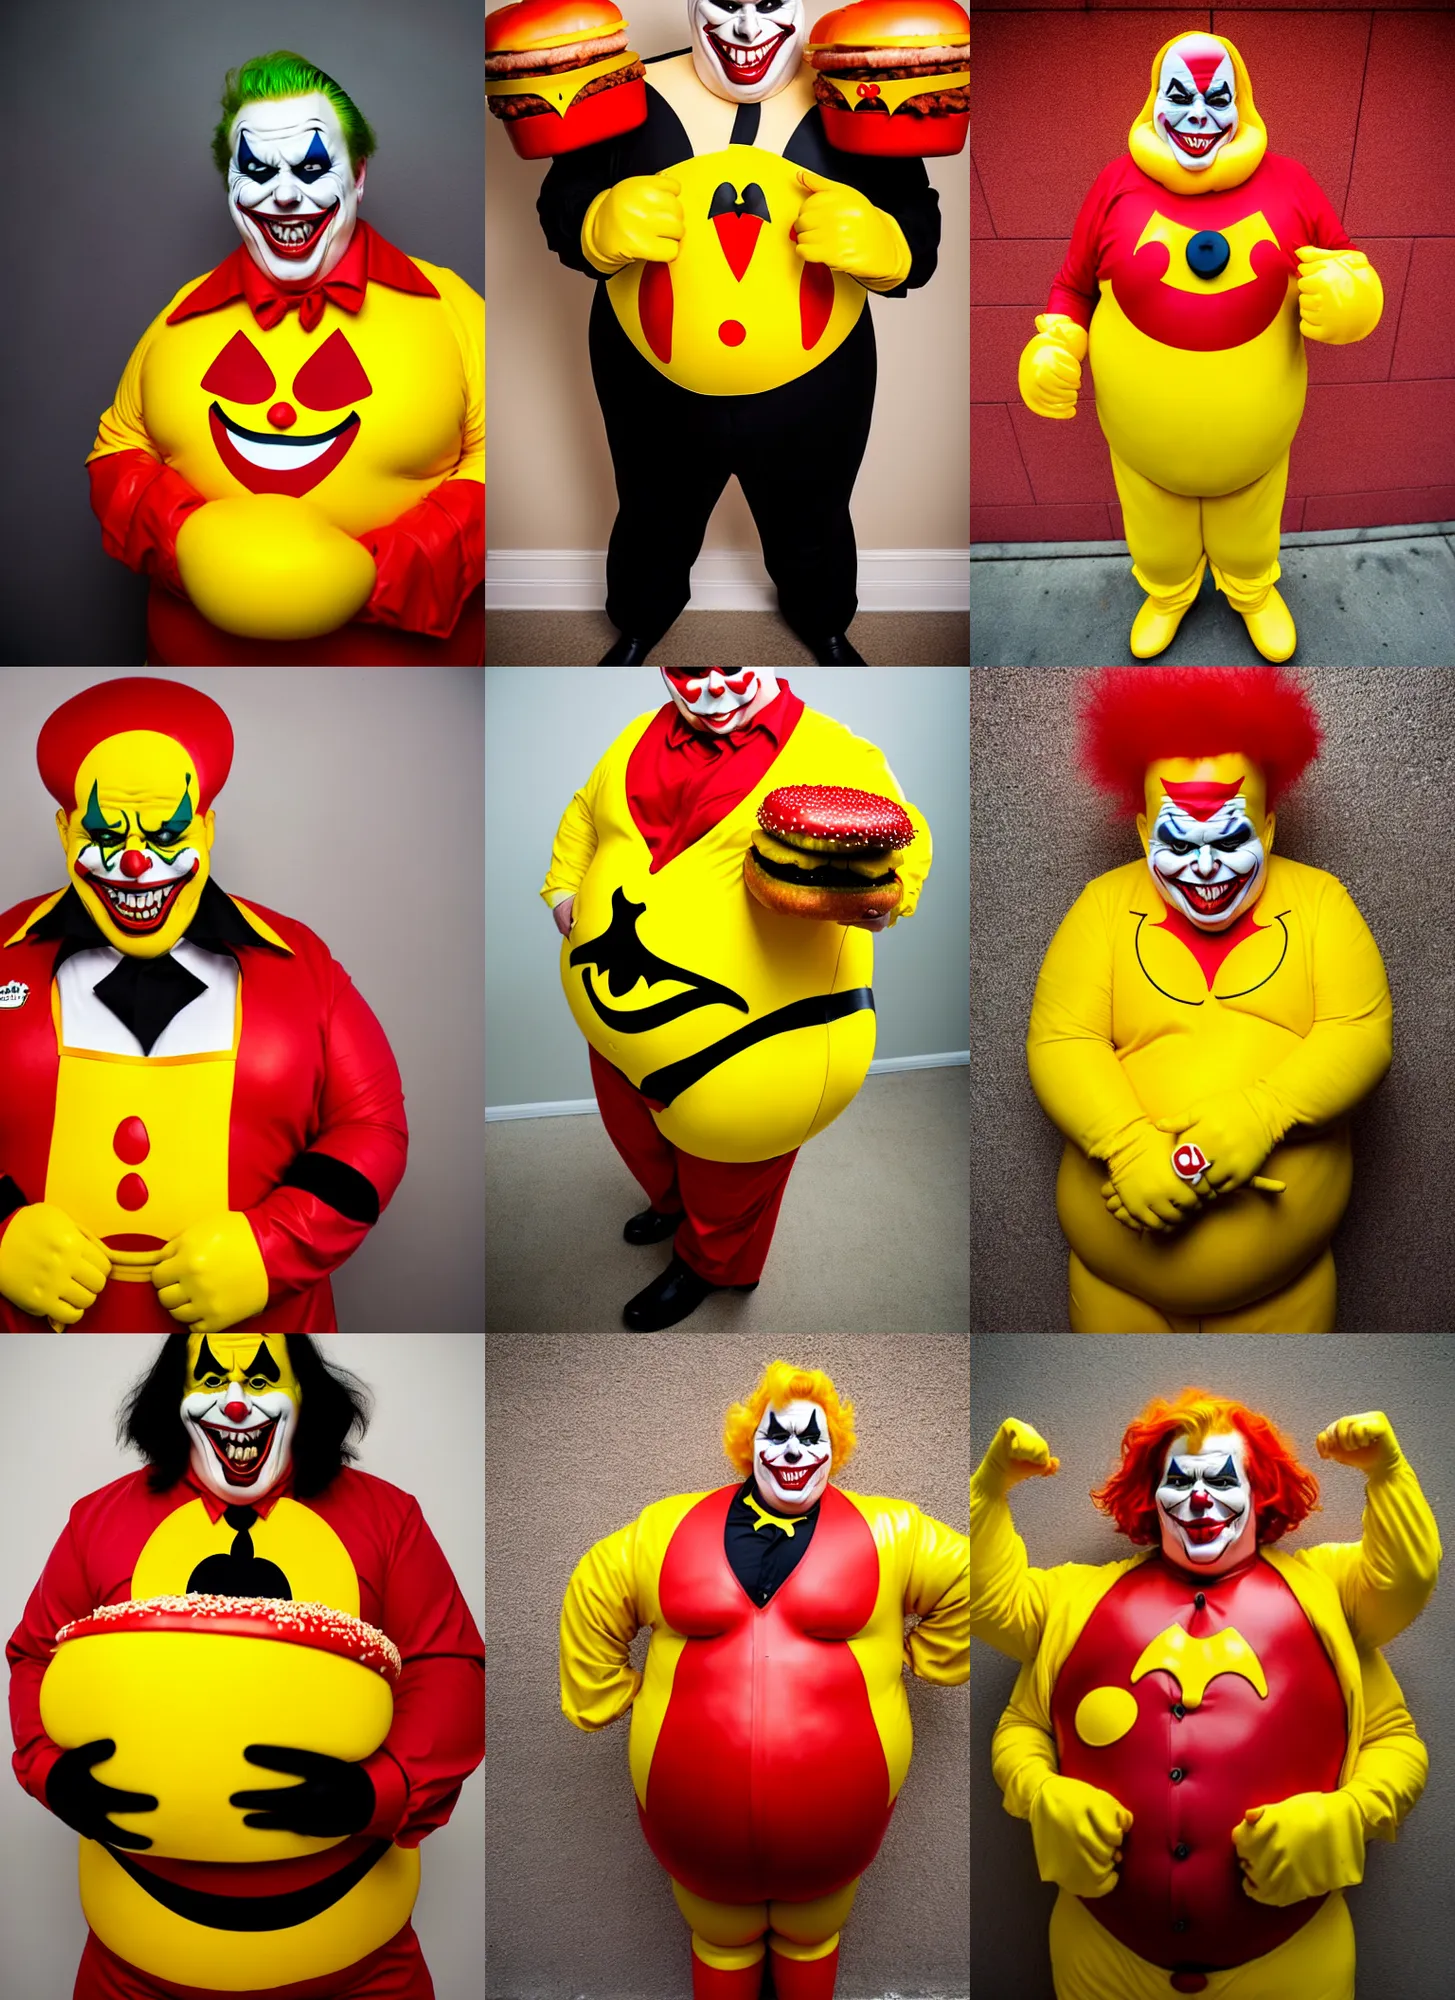 Prompt: wide angle lens portrait of a very chubby sinister looking joker dressed in yellow and red rubber latex Ronald Macdonalds costume, carrying a sloppy huge hamburger, red hair, a Macdonalds logo on his chest, art inspired by Oleg Vdovenko